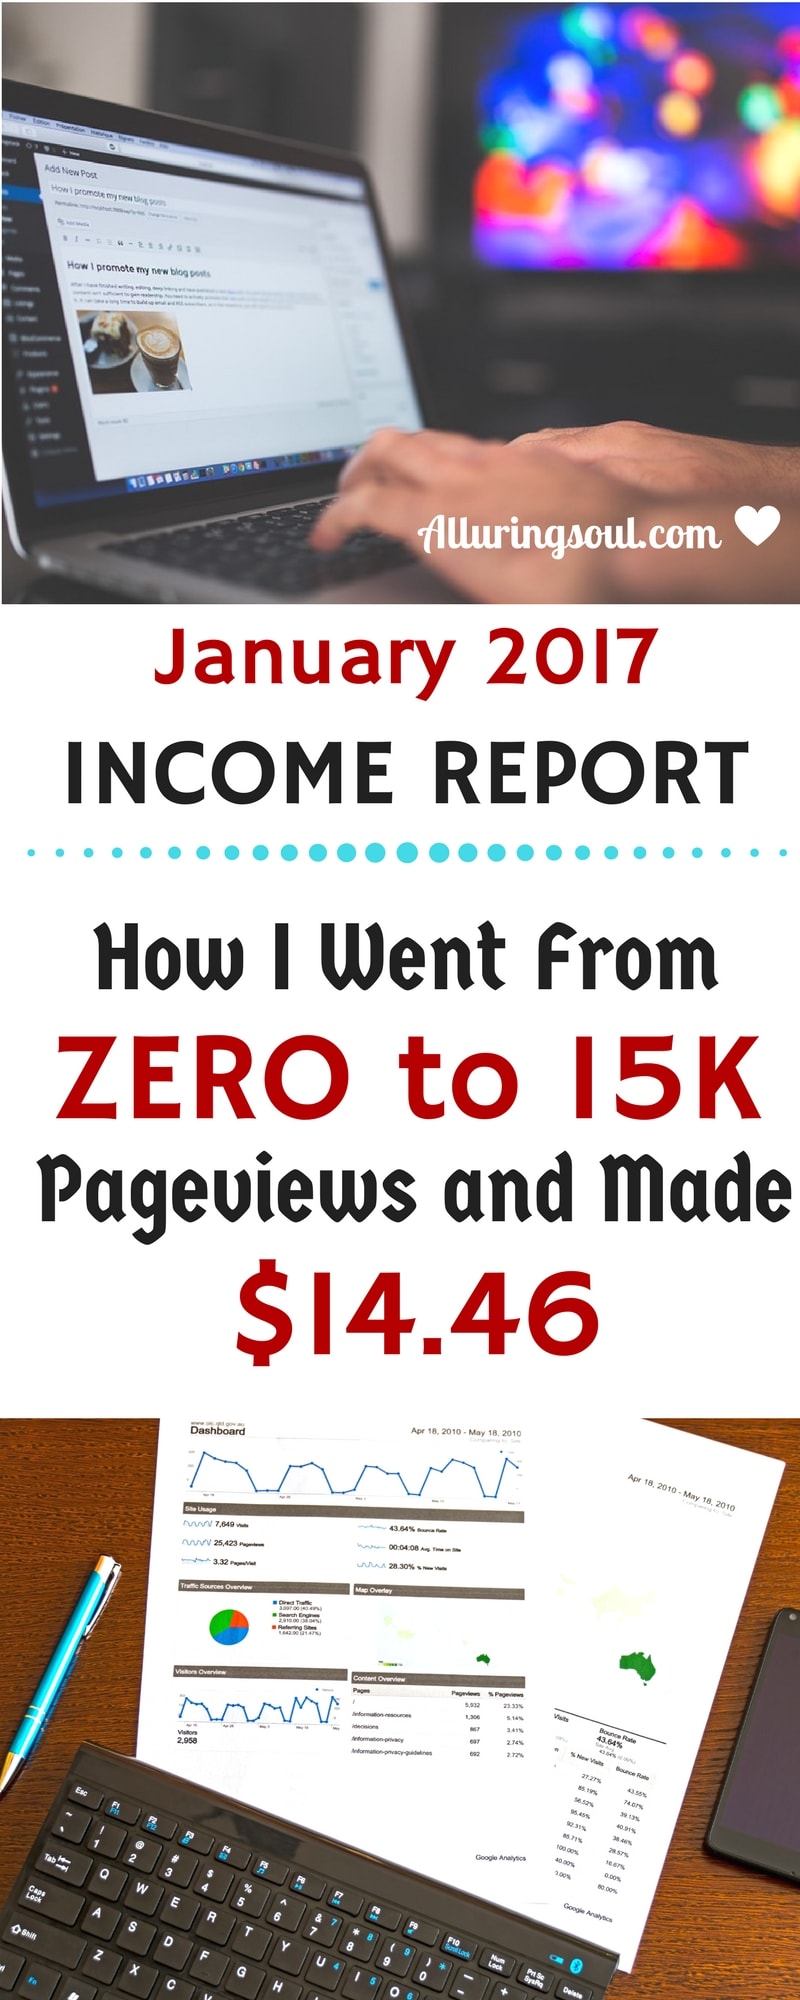 income-report-january-2017-infographic